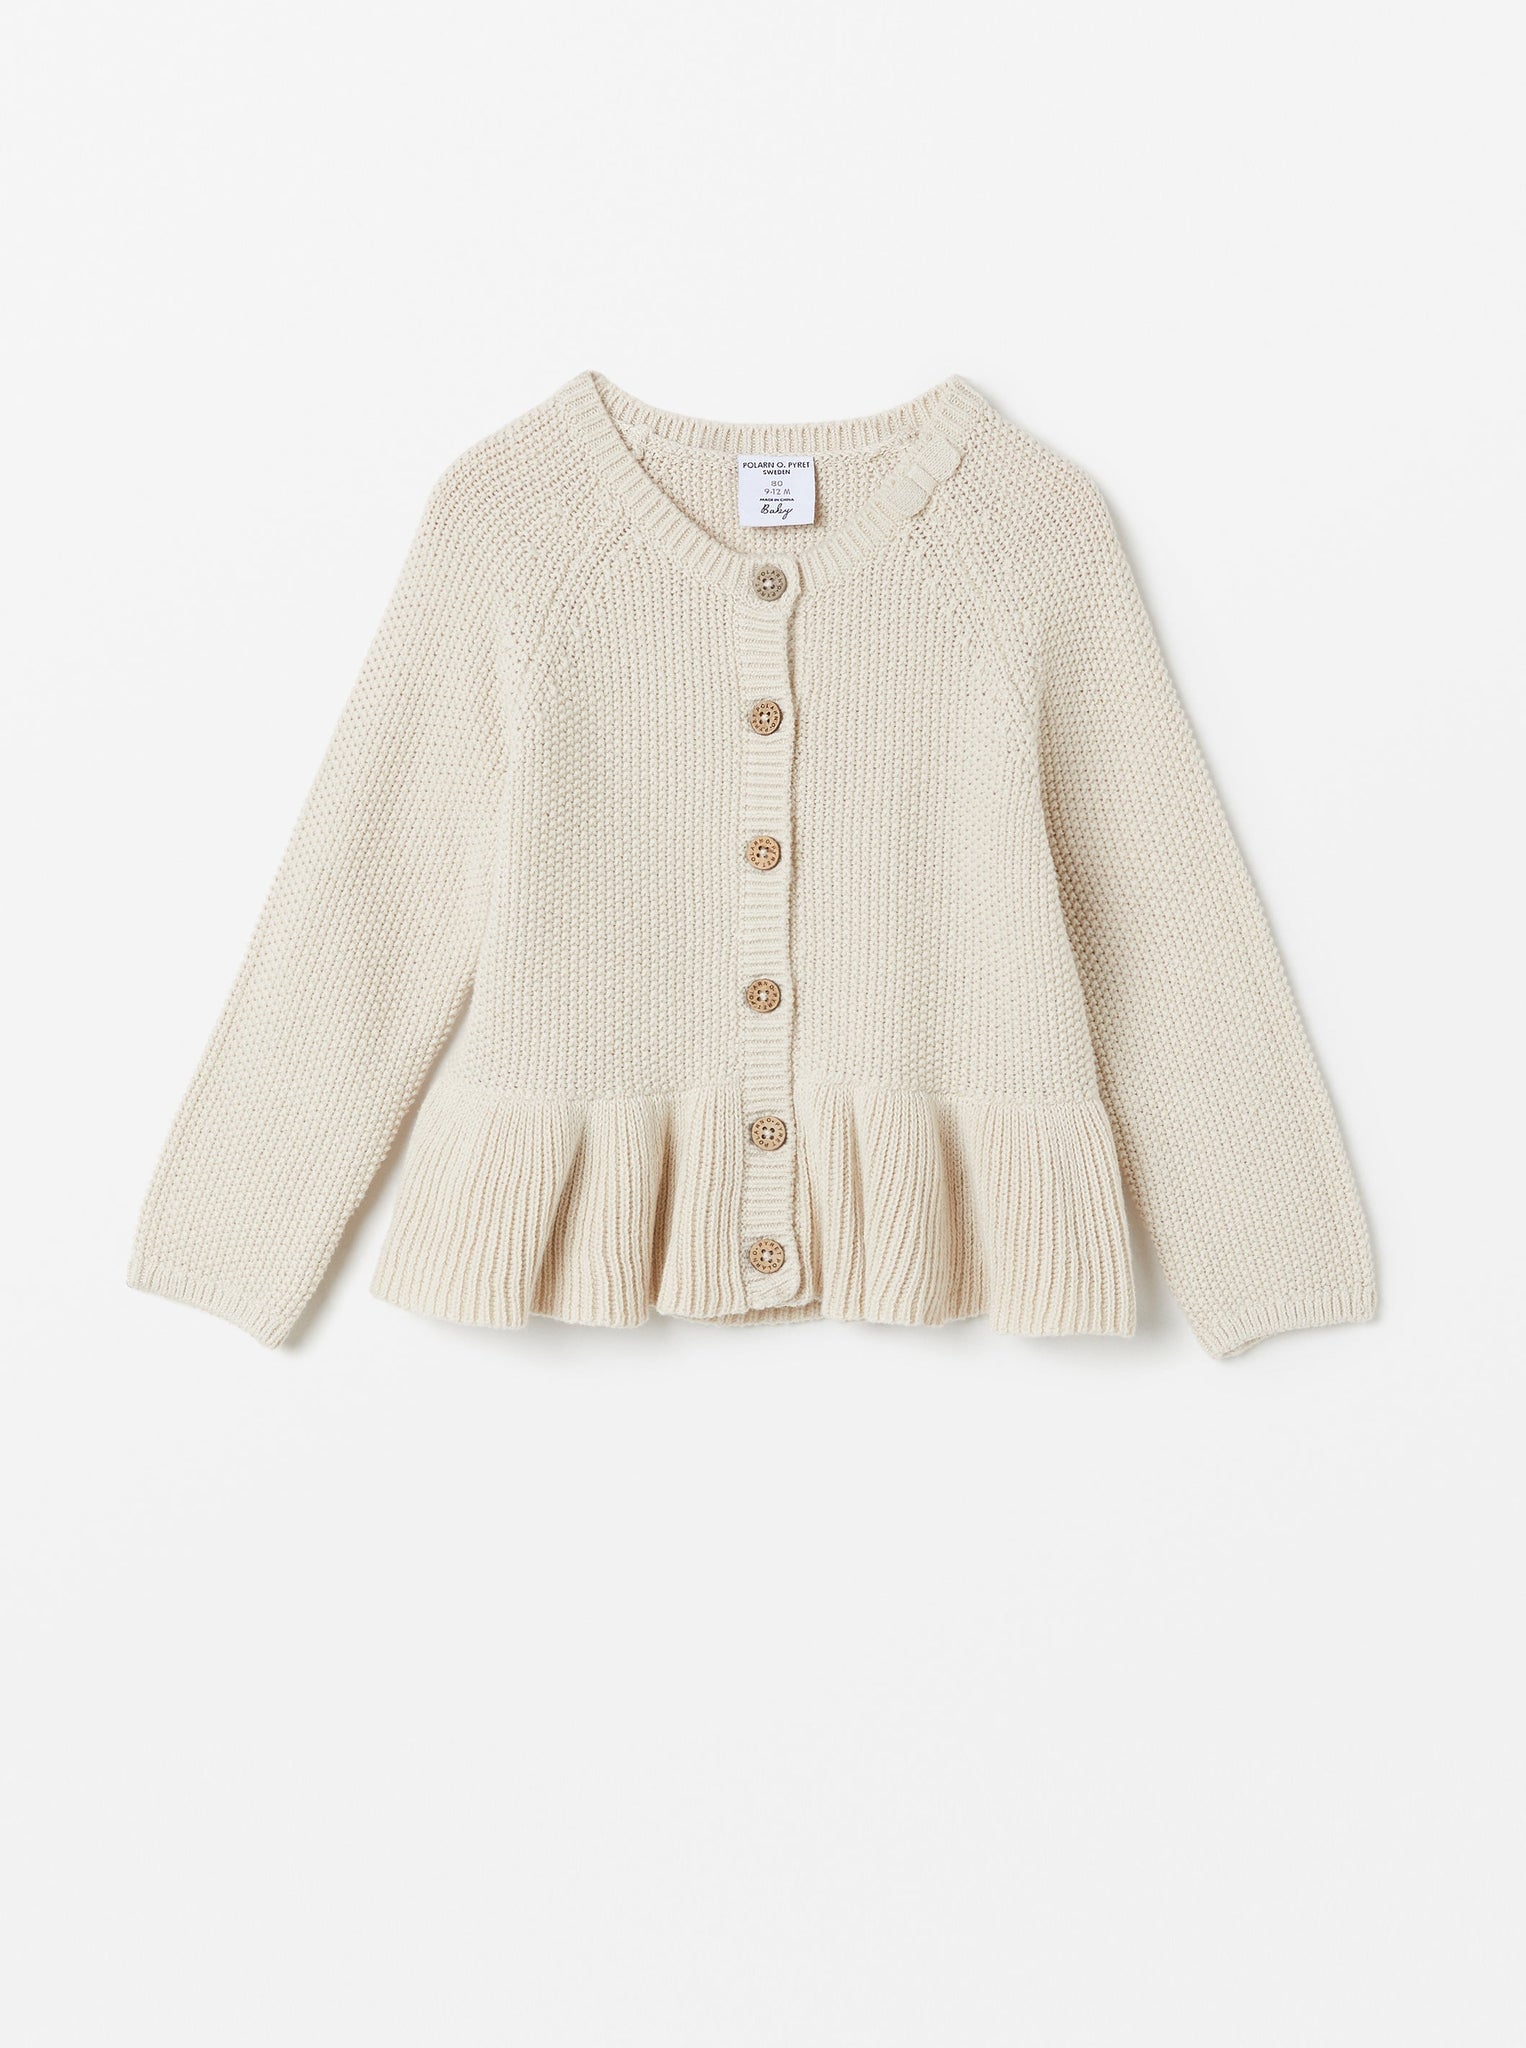 Ruffled White Knitted Baby Cardigan from the Polarn O. Pyret babywear collection. Ethically produced baby clothing.